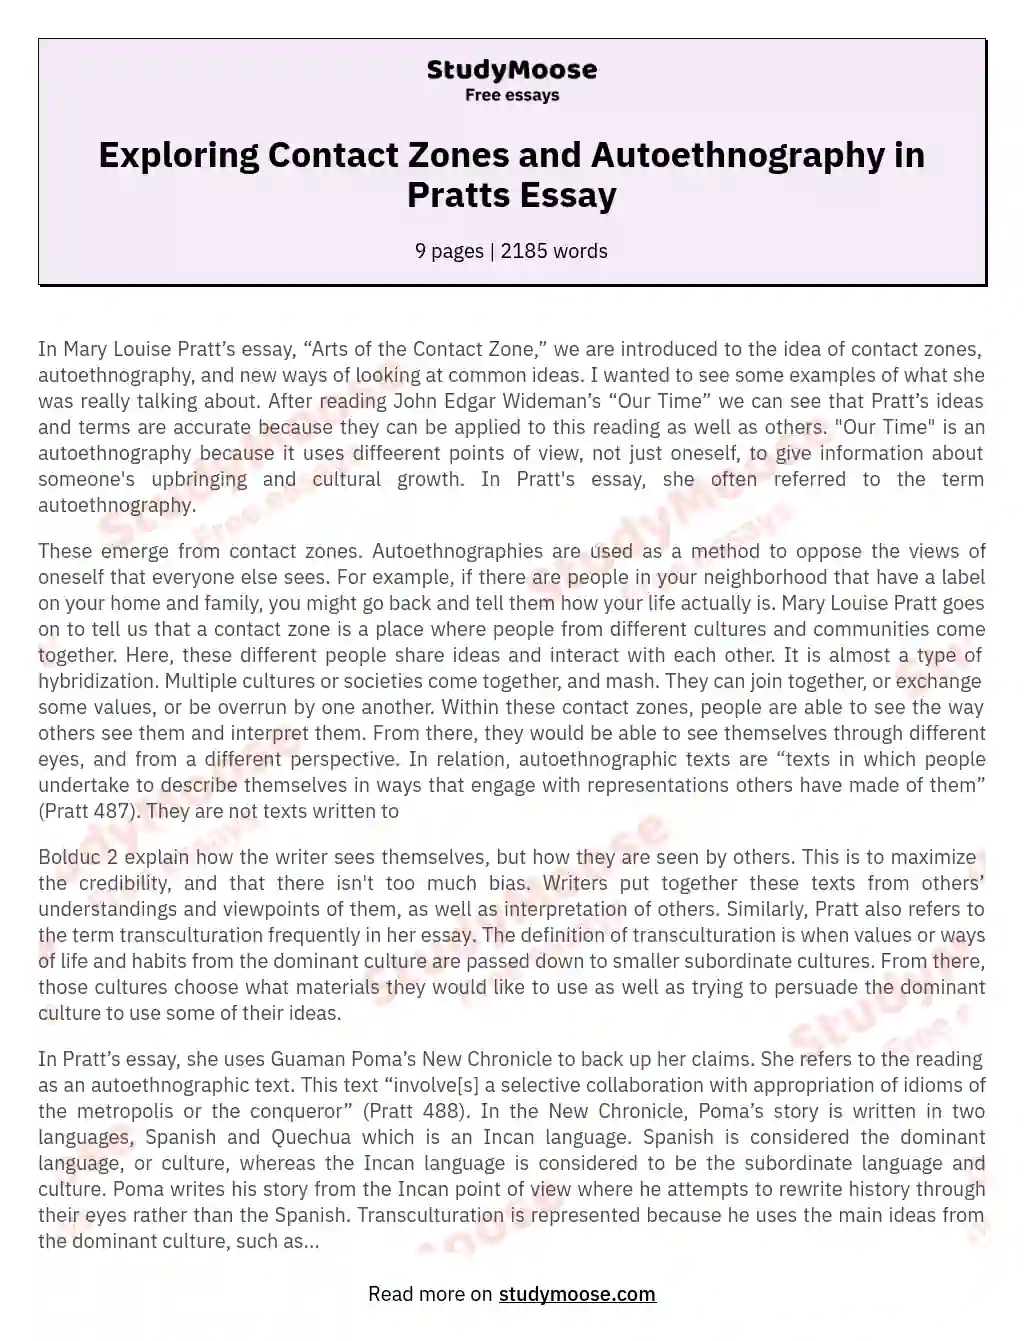 Exploring Contact Zones and Autoethnography in Pratts Essay essay